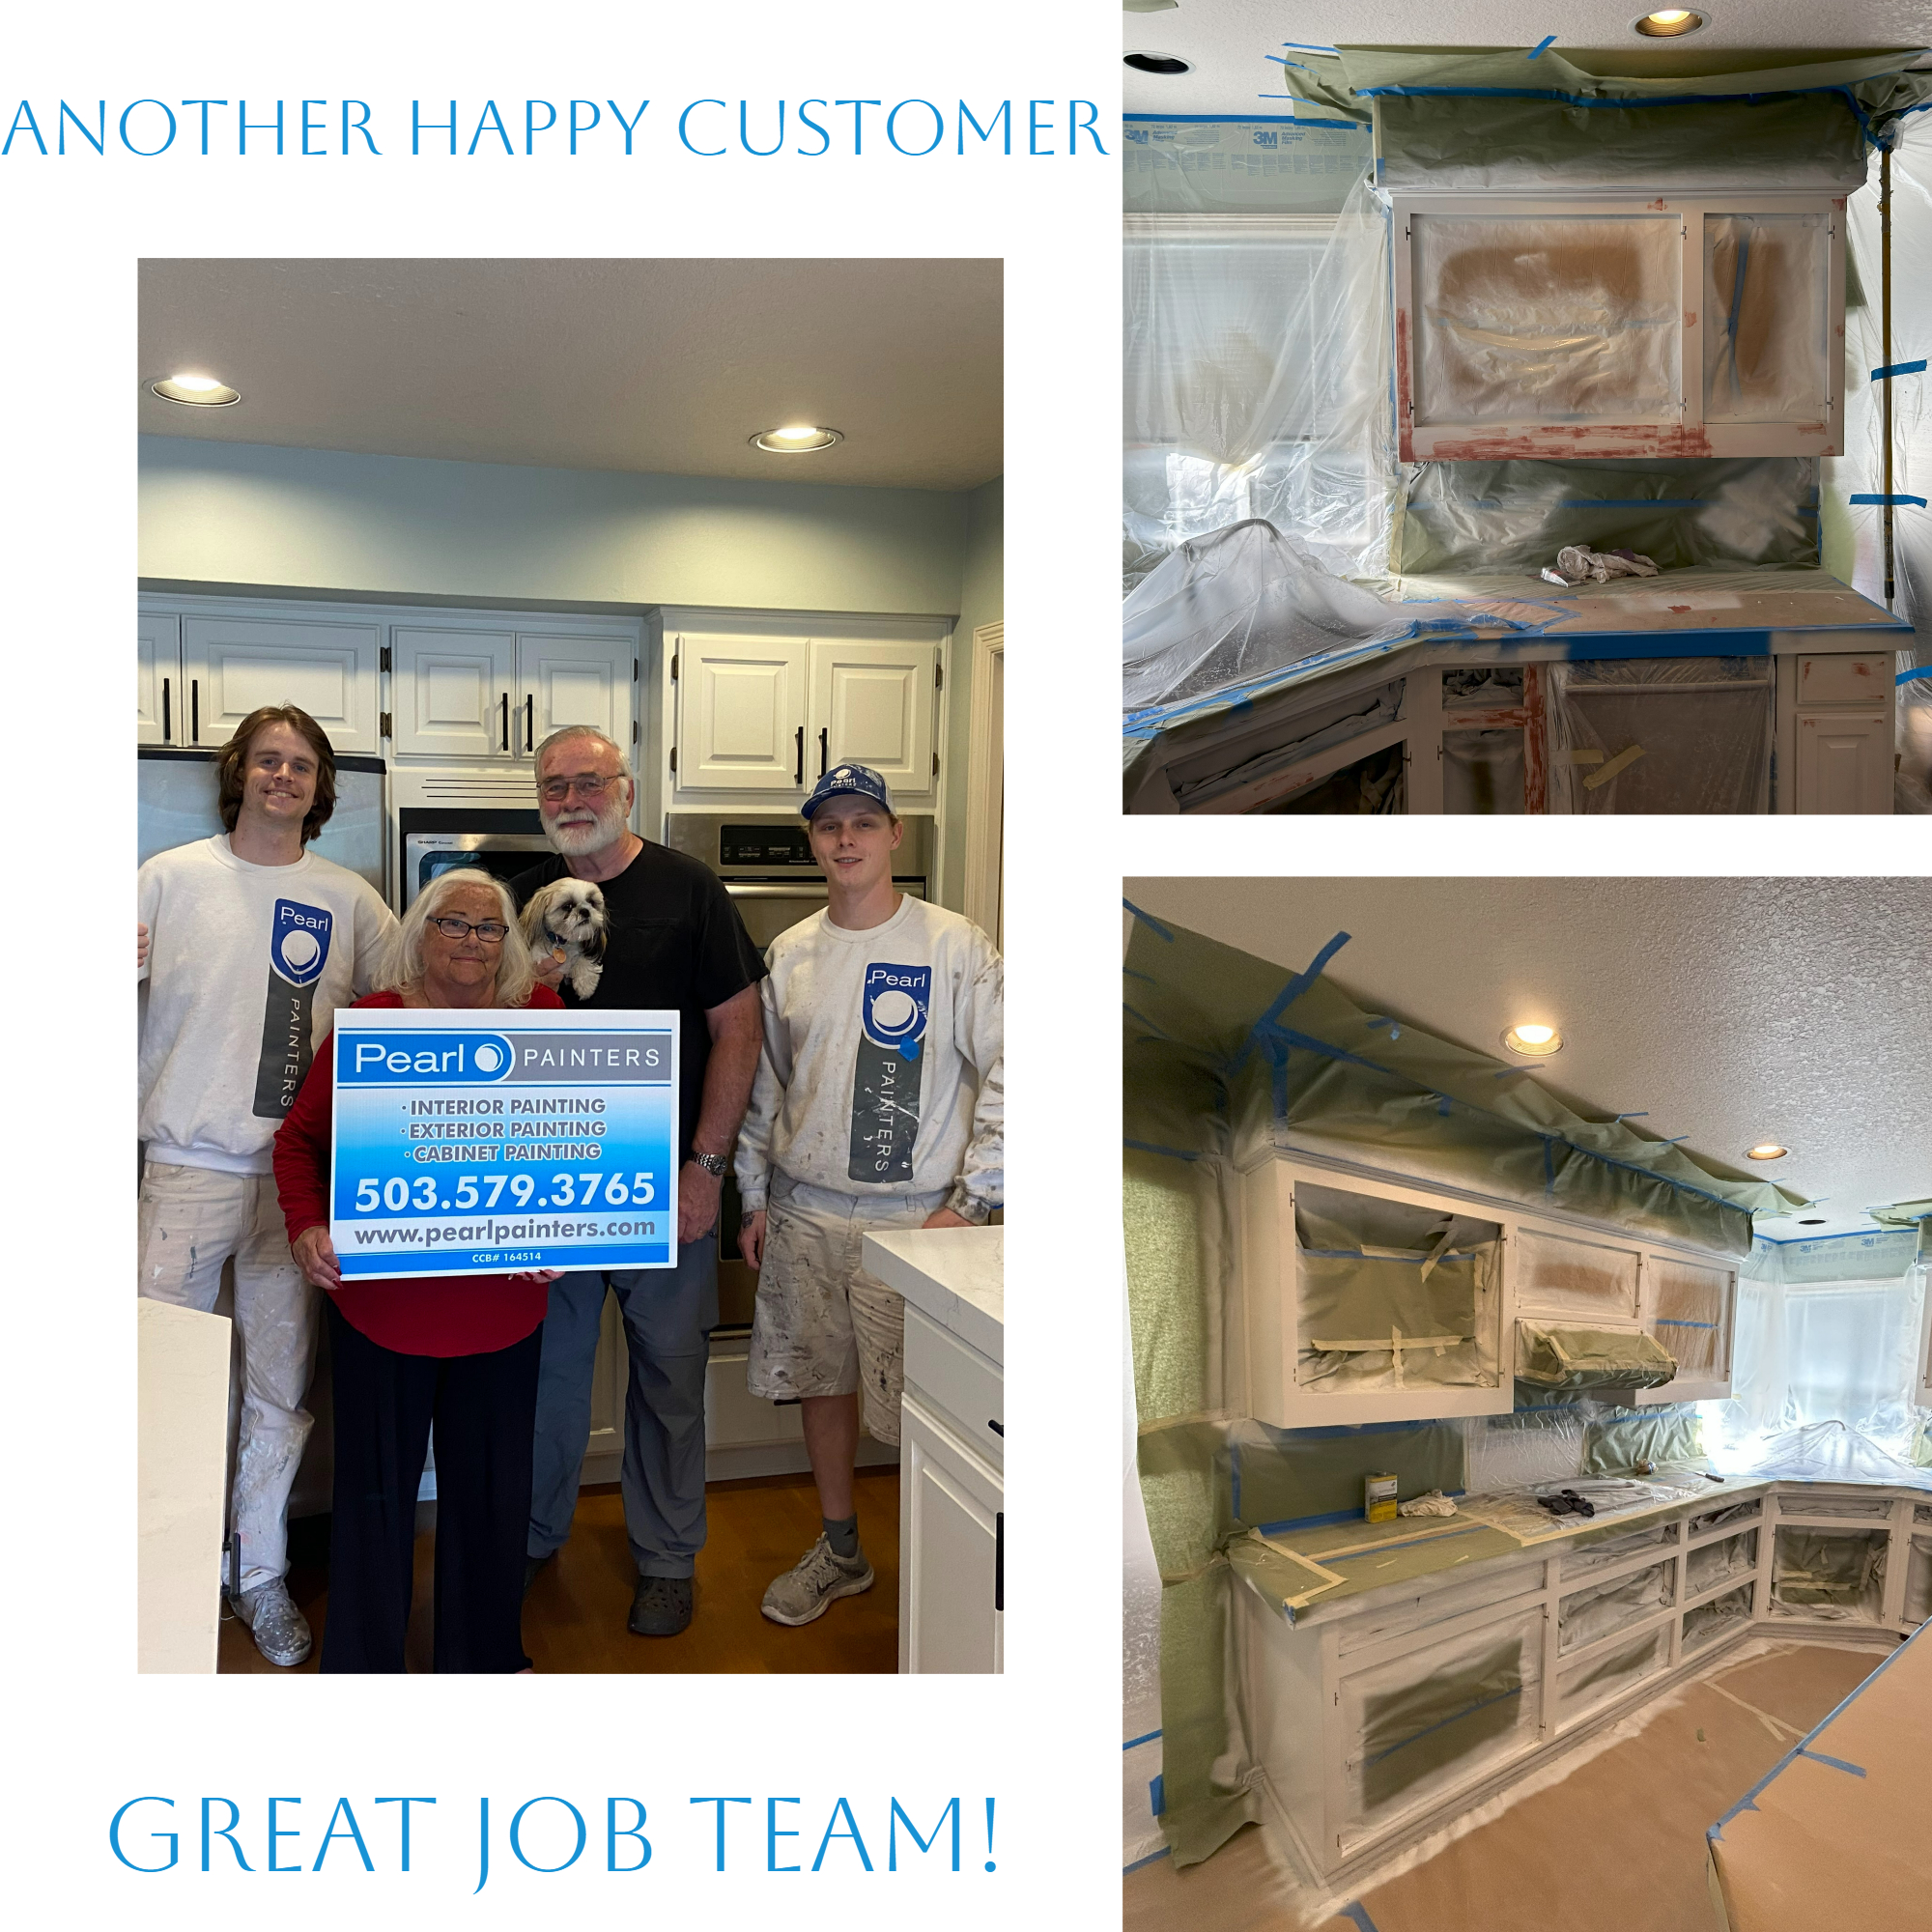 Collage of cabinets painted by Pearl Painters with "thank you, great job team" message